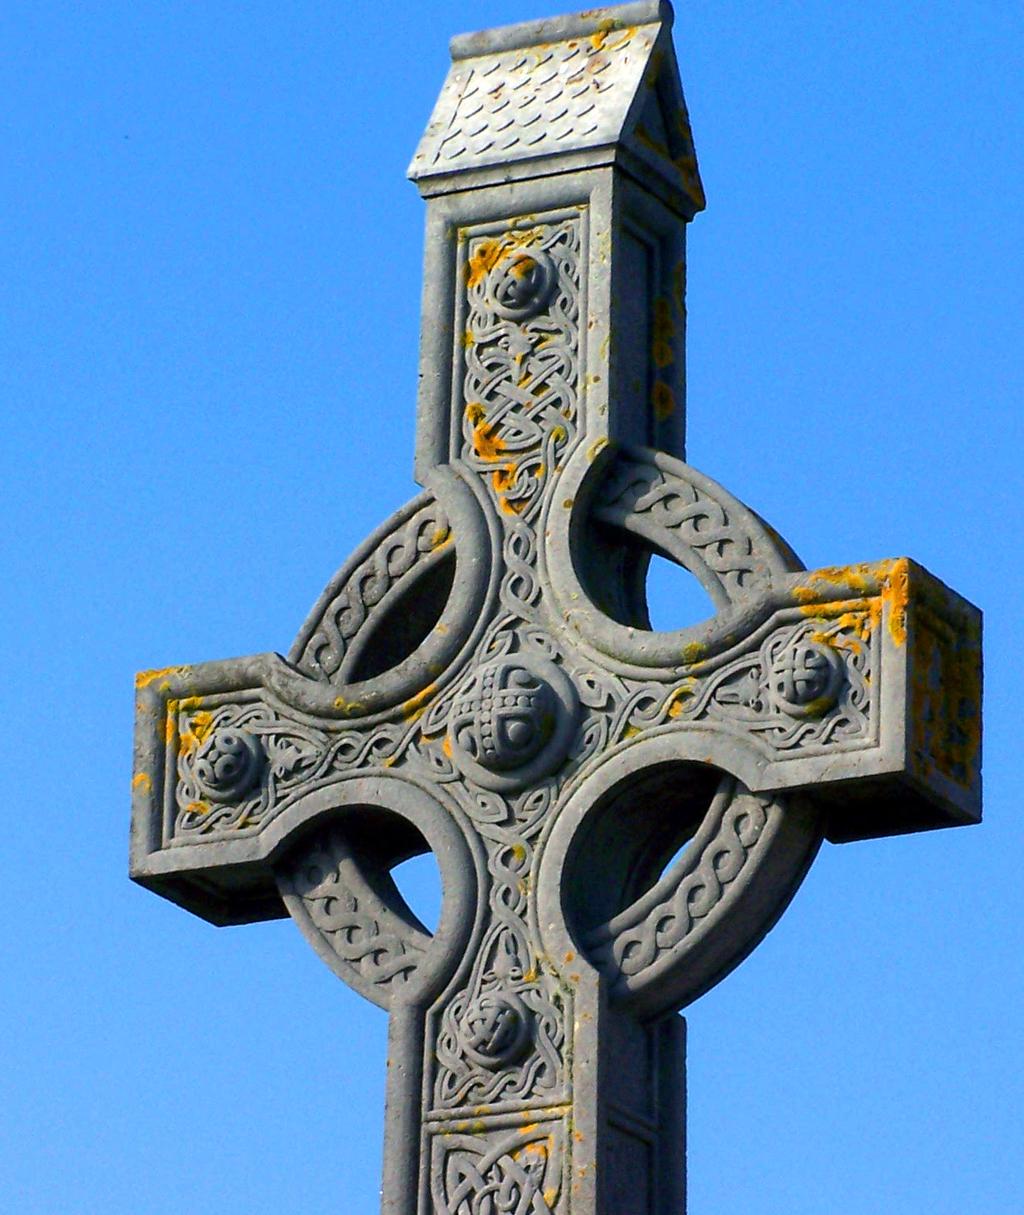 TOUR OF IRELAND SPIRITUAL DIRECTOR: FR BRYAN SABOURIN TRANSPORT AND ACCOMMODATION Flights from Boston to Dublin and return with WestJet 12 nights accommodation in 4 star hotels throughout Private